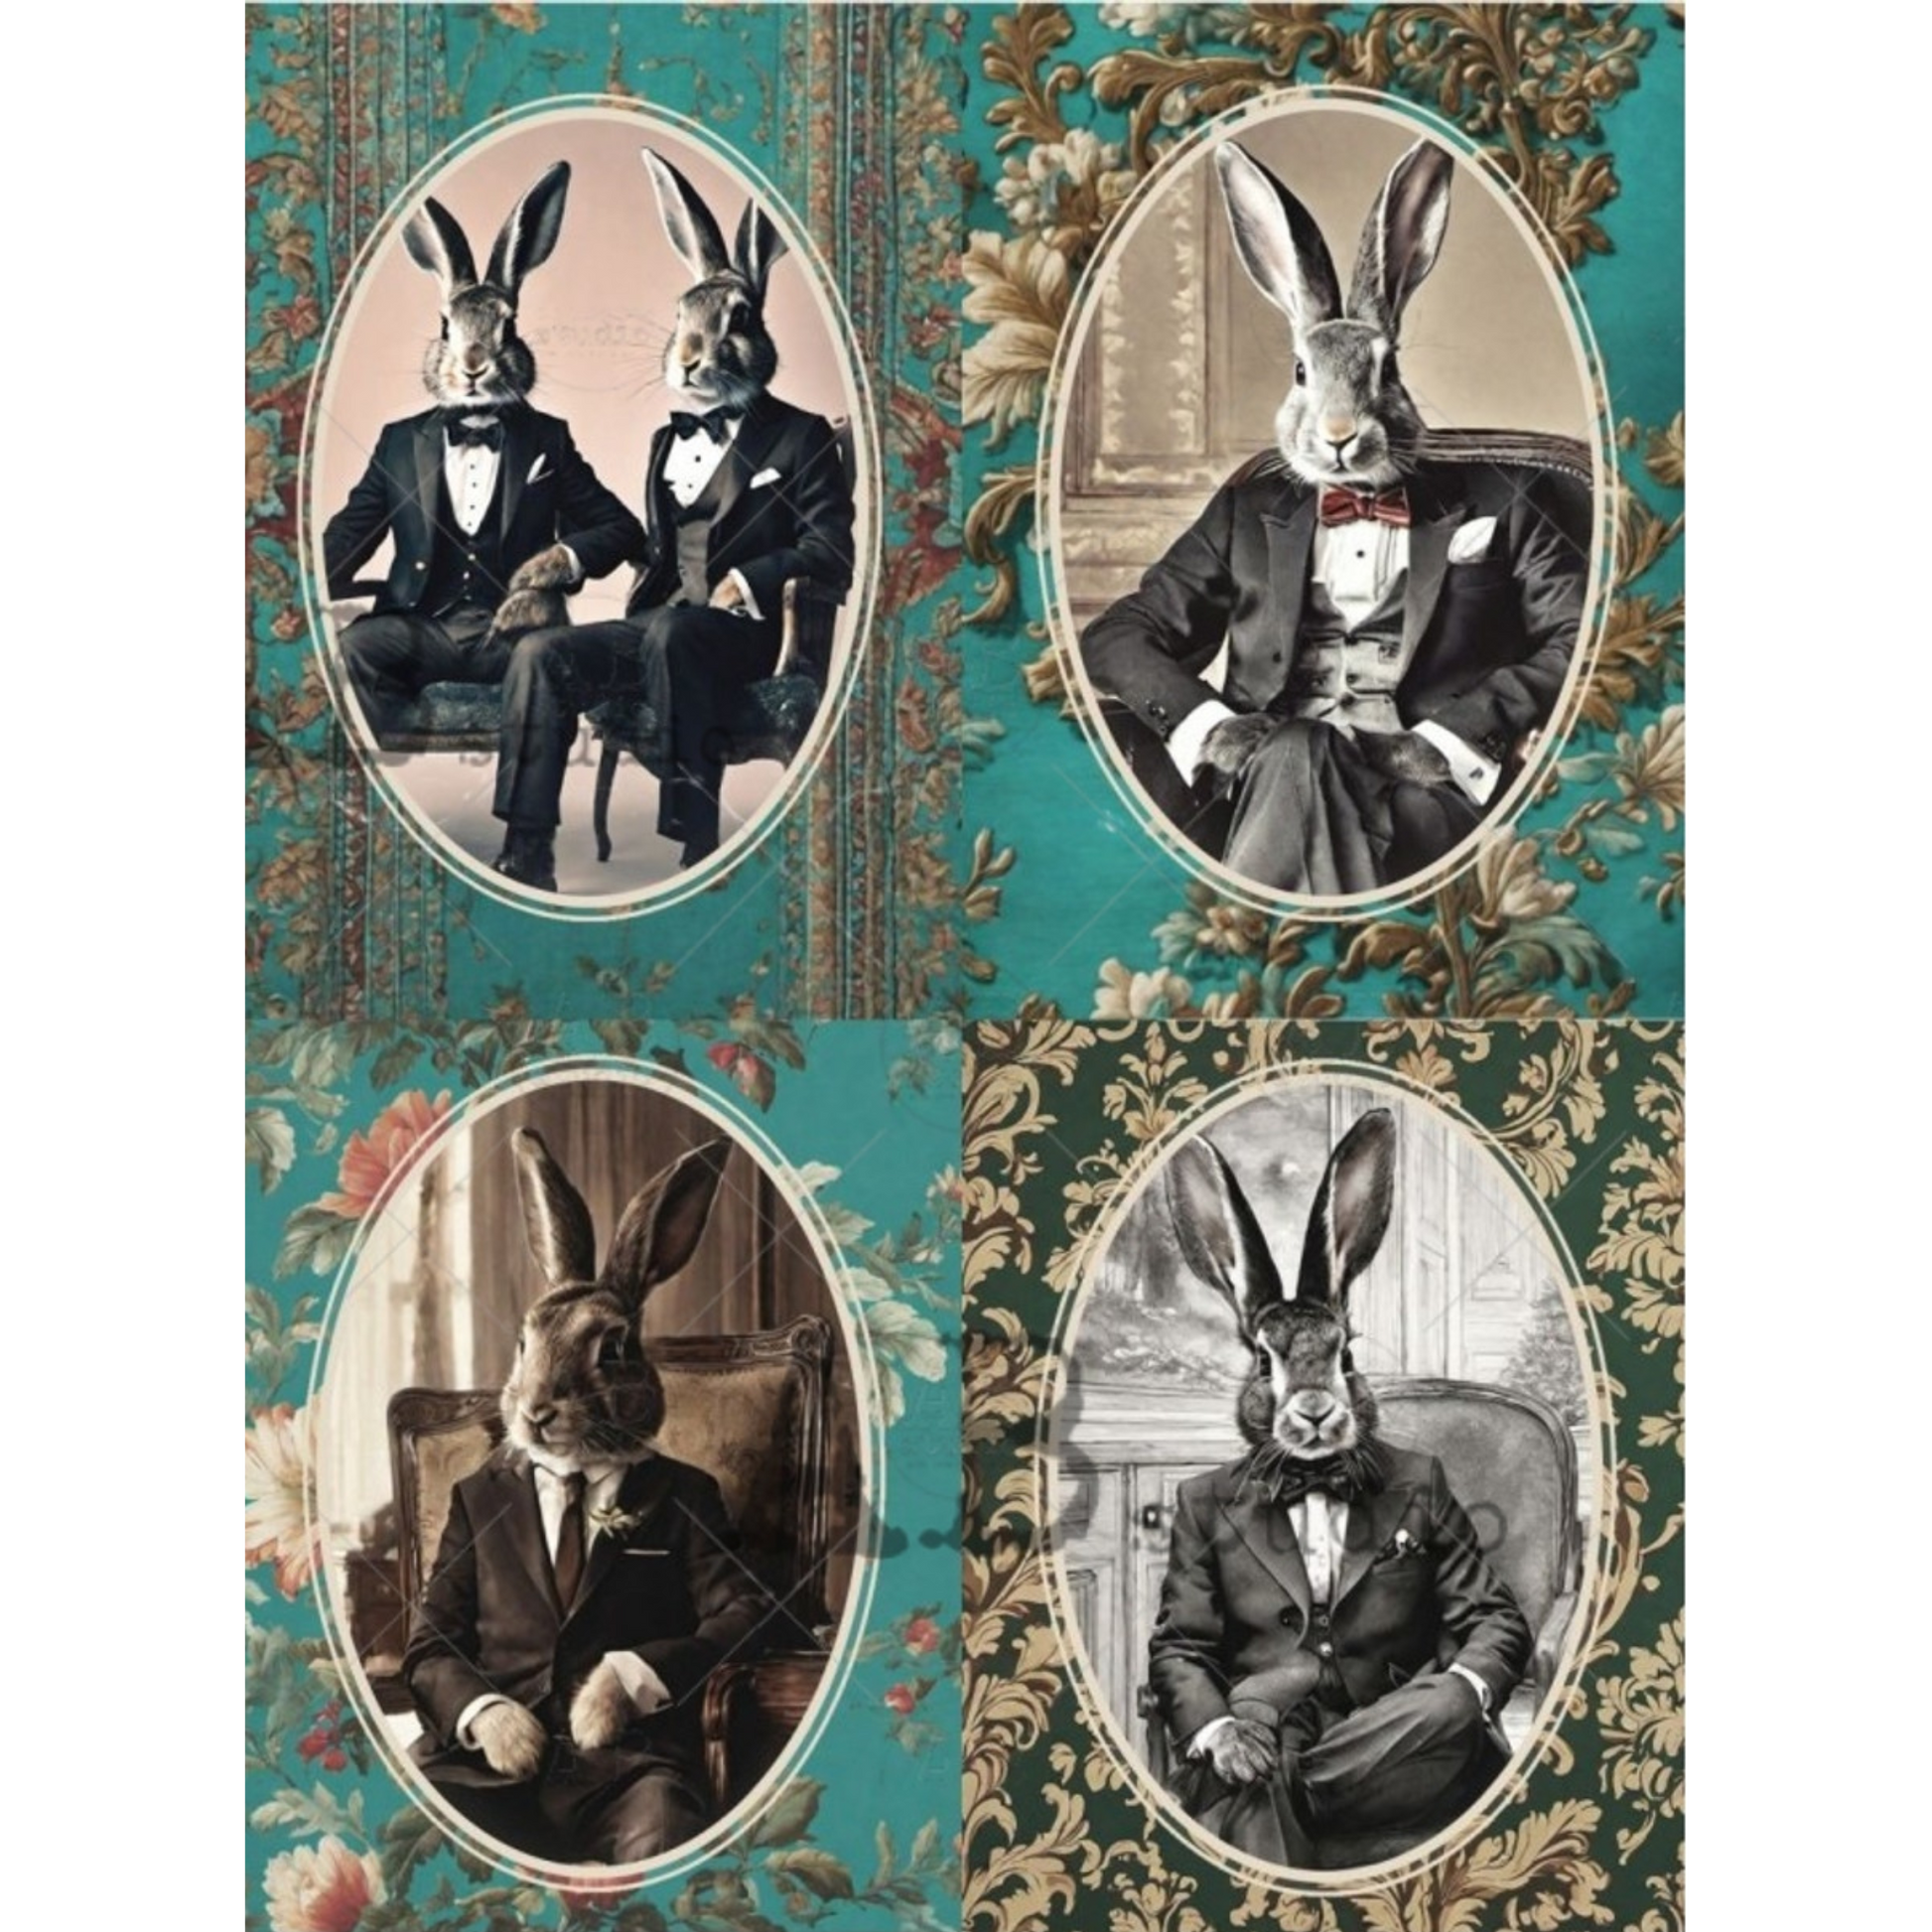 "Distinguished Bunny Portraits" decoupage rice paper by AB Studio. Available at Milton's Daughter.